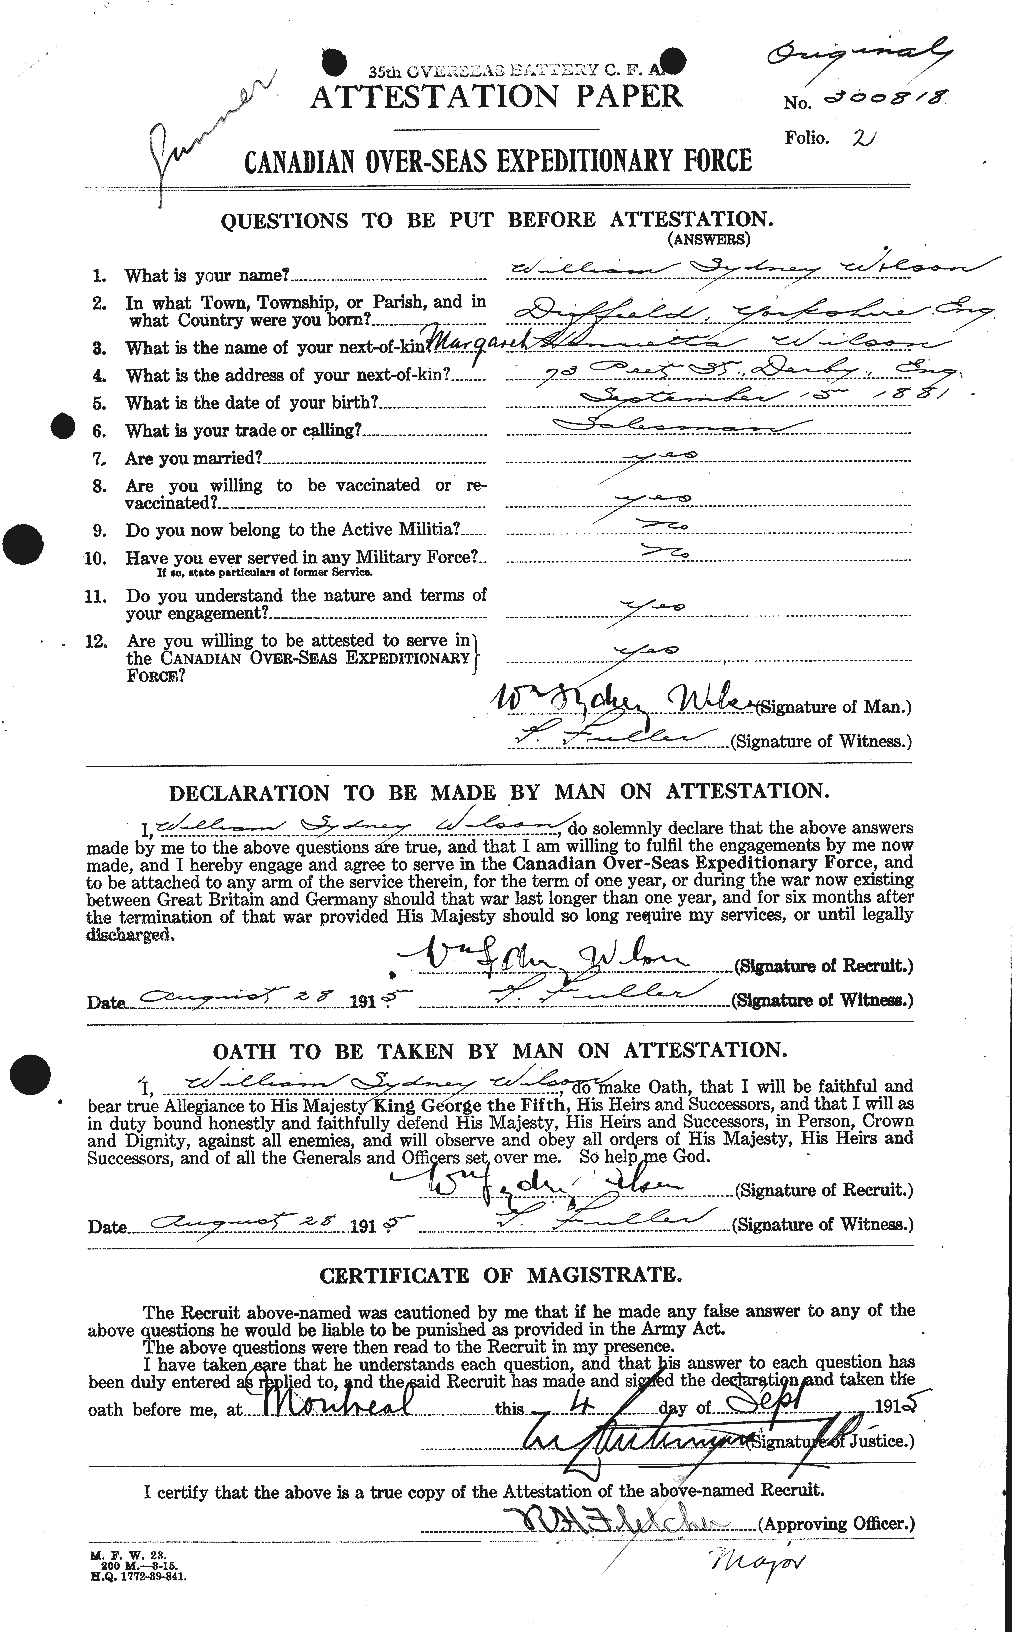 Personnel Records of the First World War - CEF 684112a